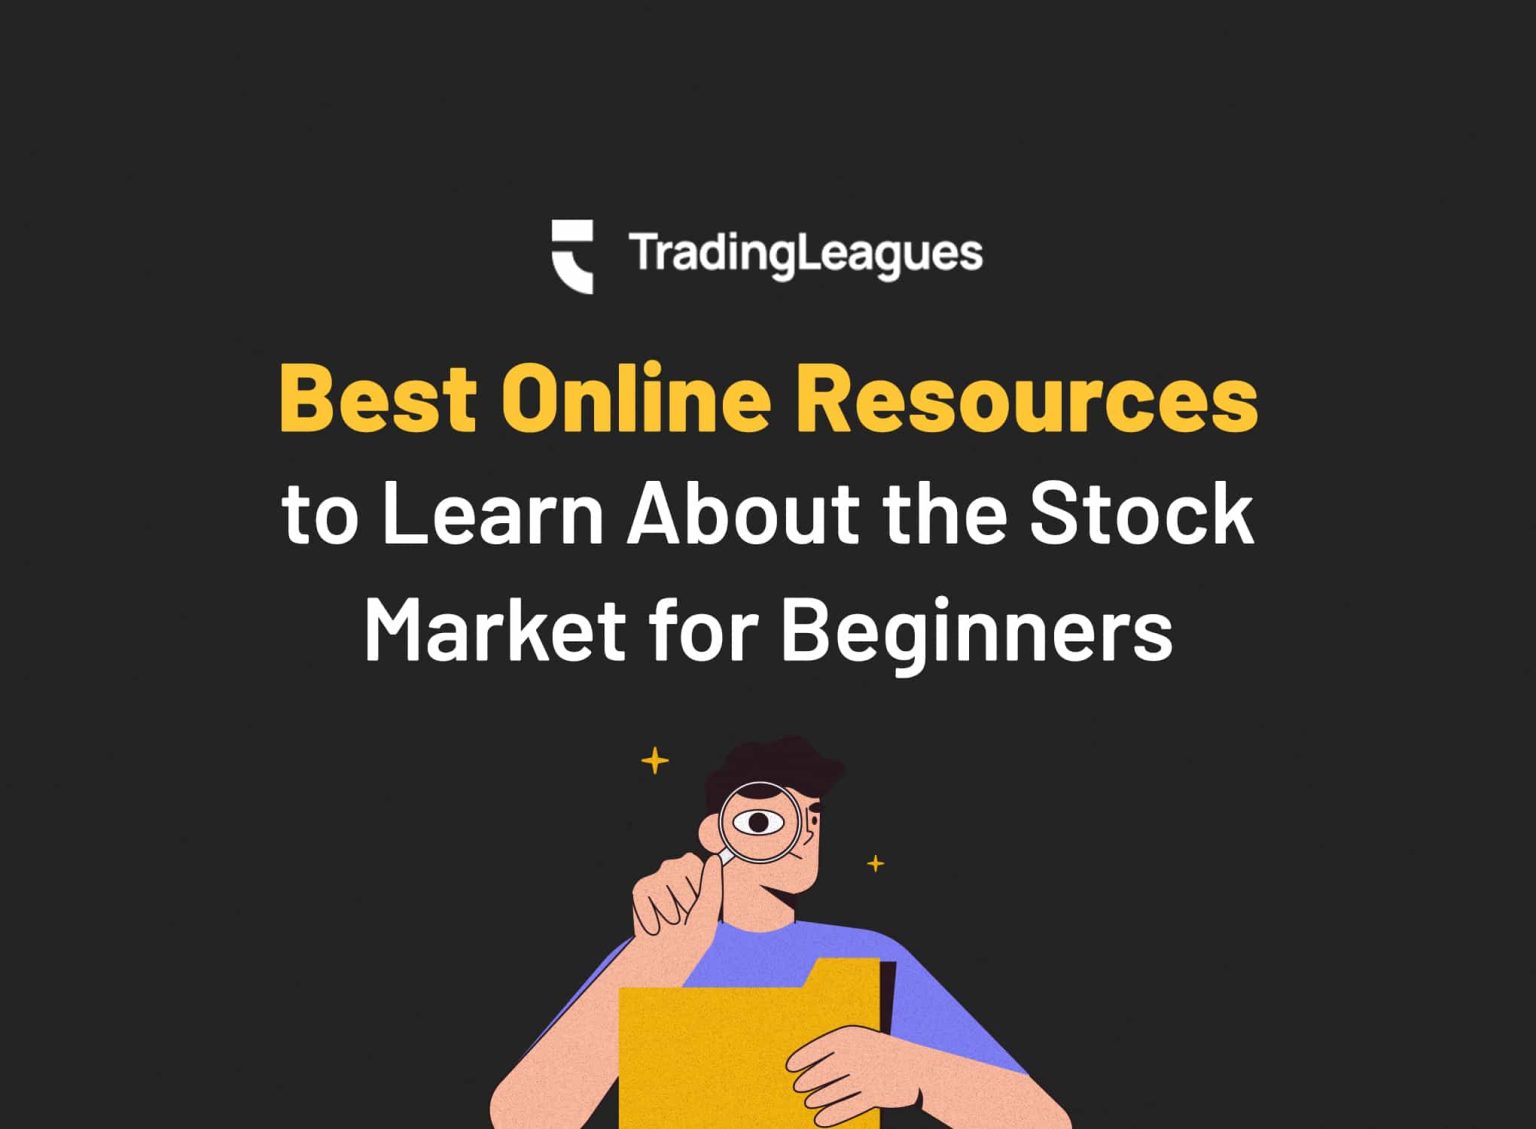 Best Online Resources to Learn About the Stock Market for Beginners